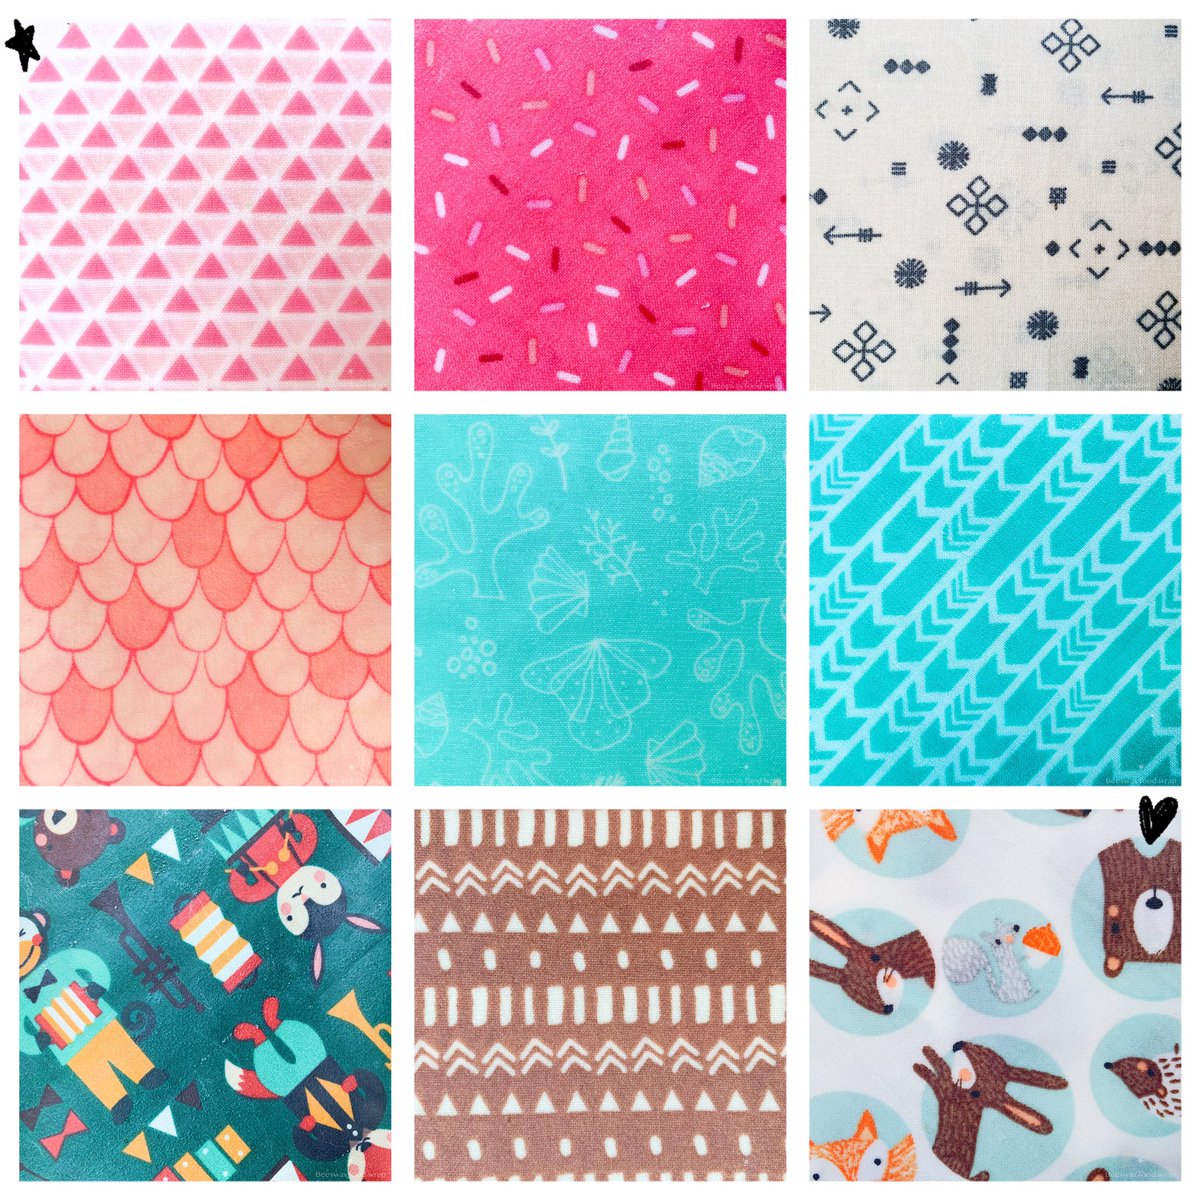 Eco Lun is back online! Which is your favourite pattern? Are you team pink or baby blue?🙈 check out our Etsy store! Link in bio  #beeswaxfoodwrap elife #handmade  #ecofriendly #lesswastelifestyle #giftidea #giftforher #giftformom #shoplocal #shopsmallbusines